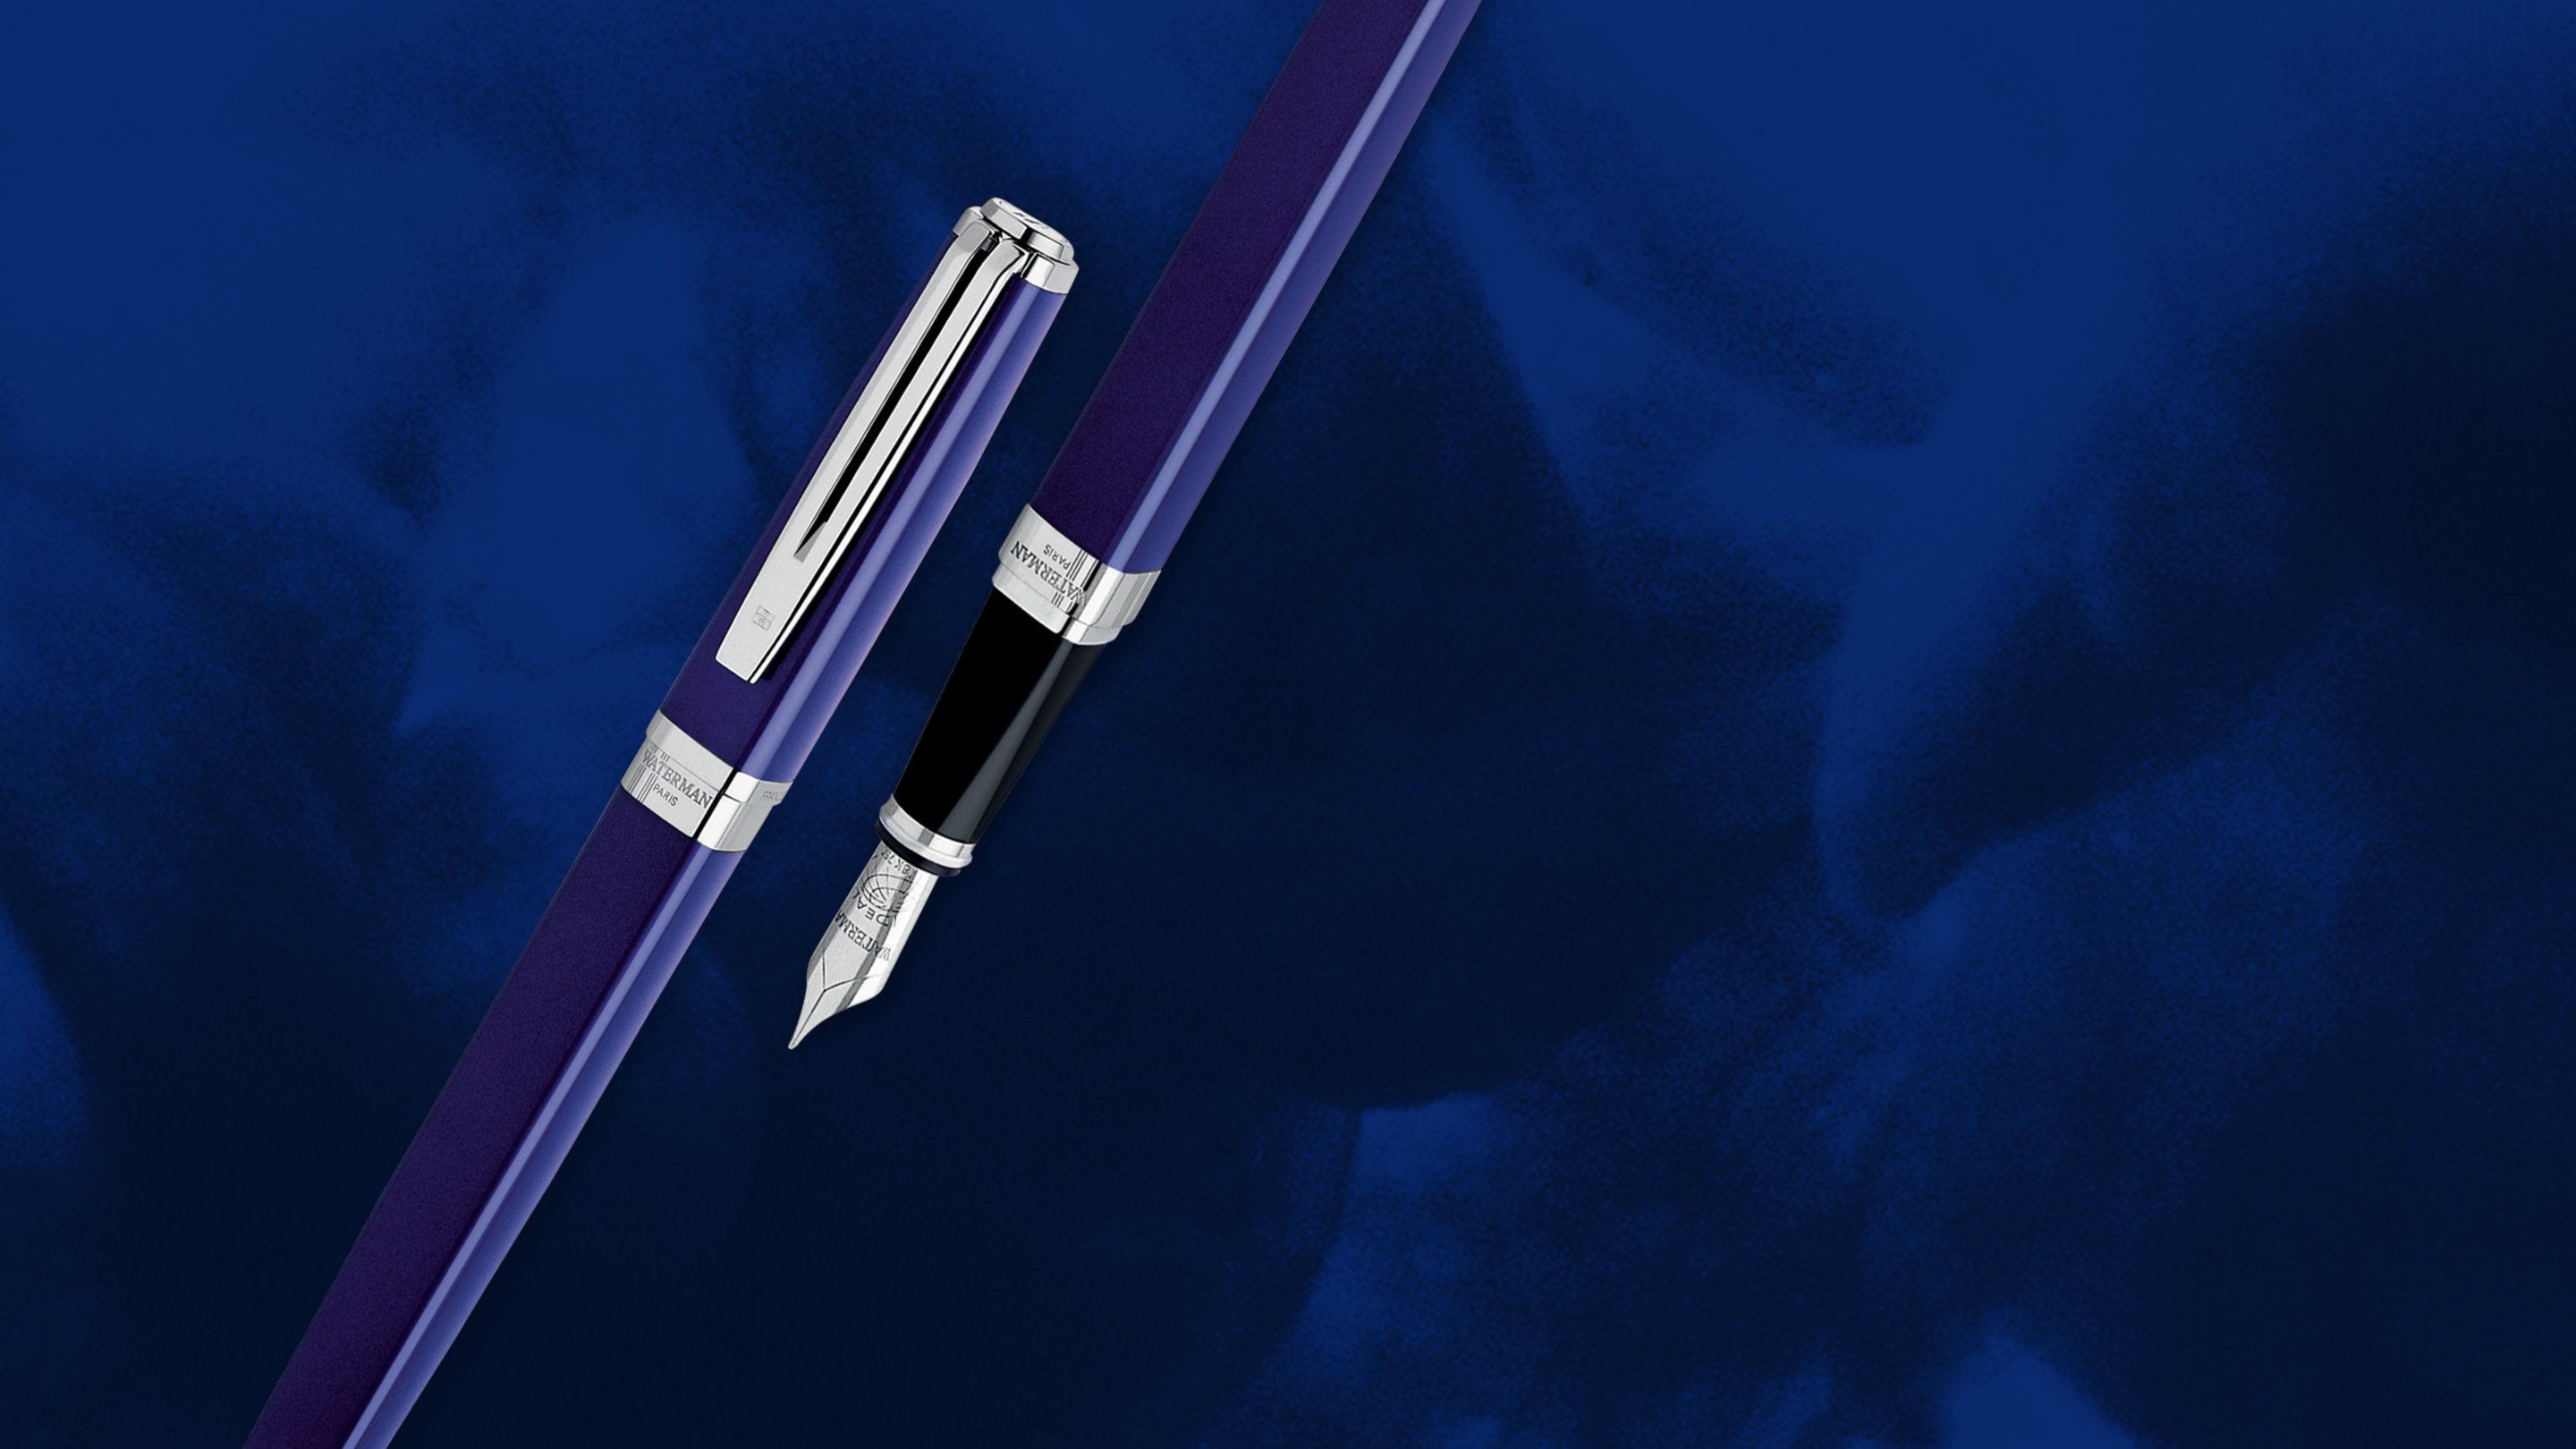 An Exception pen cap next to an Exception fountain pen with chrome trim over a smoky background.